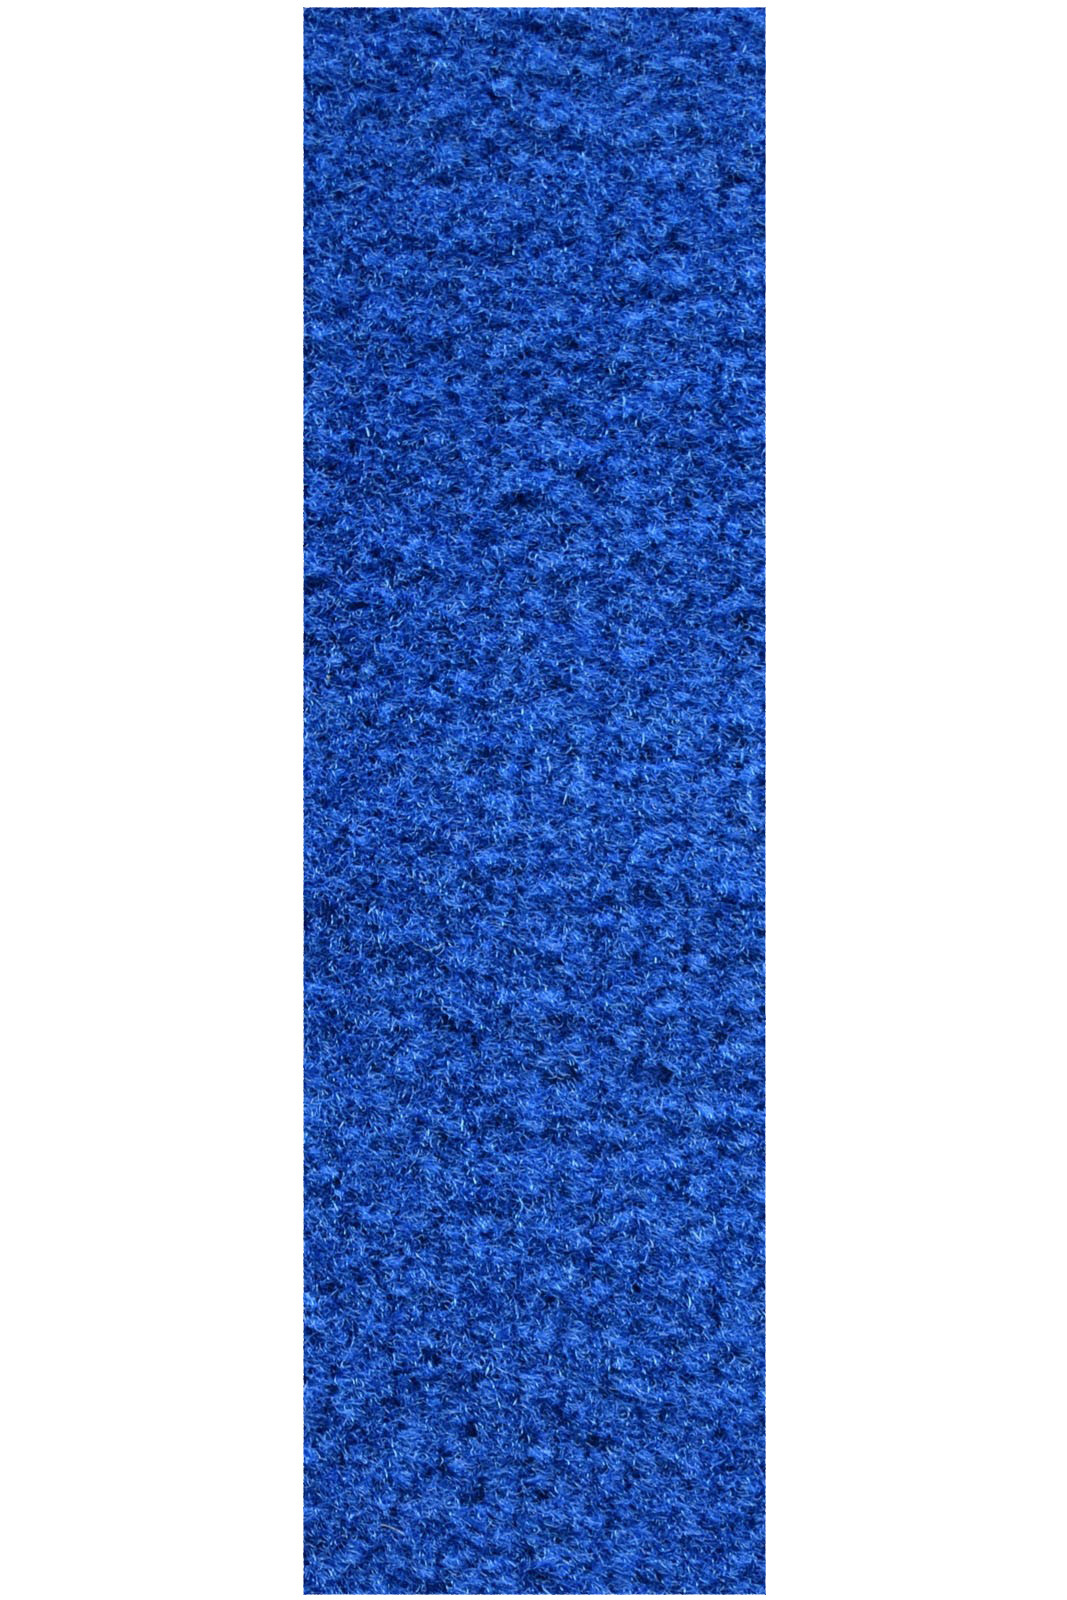 Commercial Indoor/Outdoor Blue Custom Size Runner 3' x 34' - Area Rug with Rubber Marine Backing for Patio, Porch, Deck, Boat, Basement or Garage with Premium Bound Polyester Edges - image 1 of 1